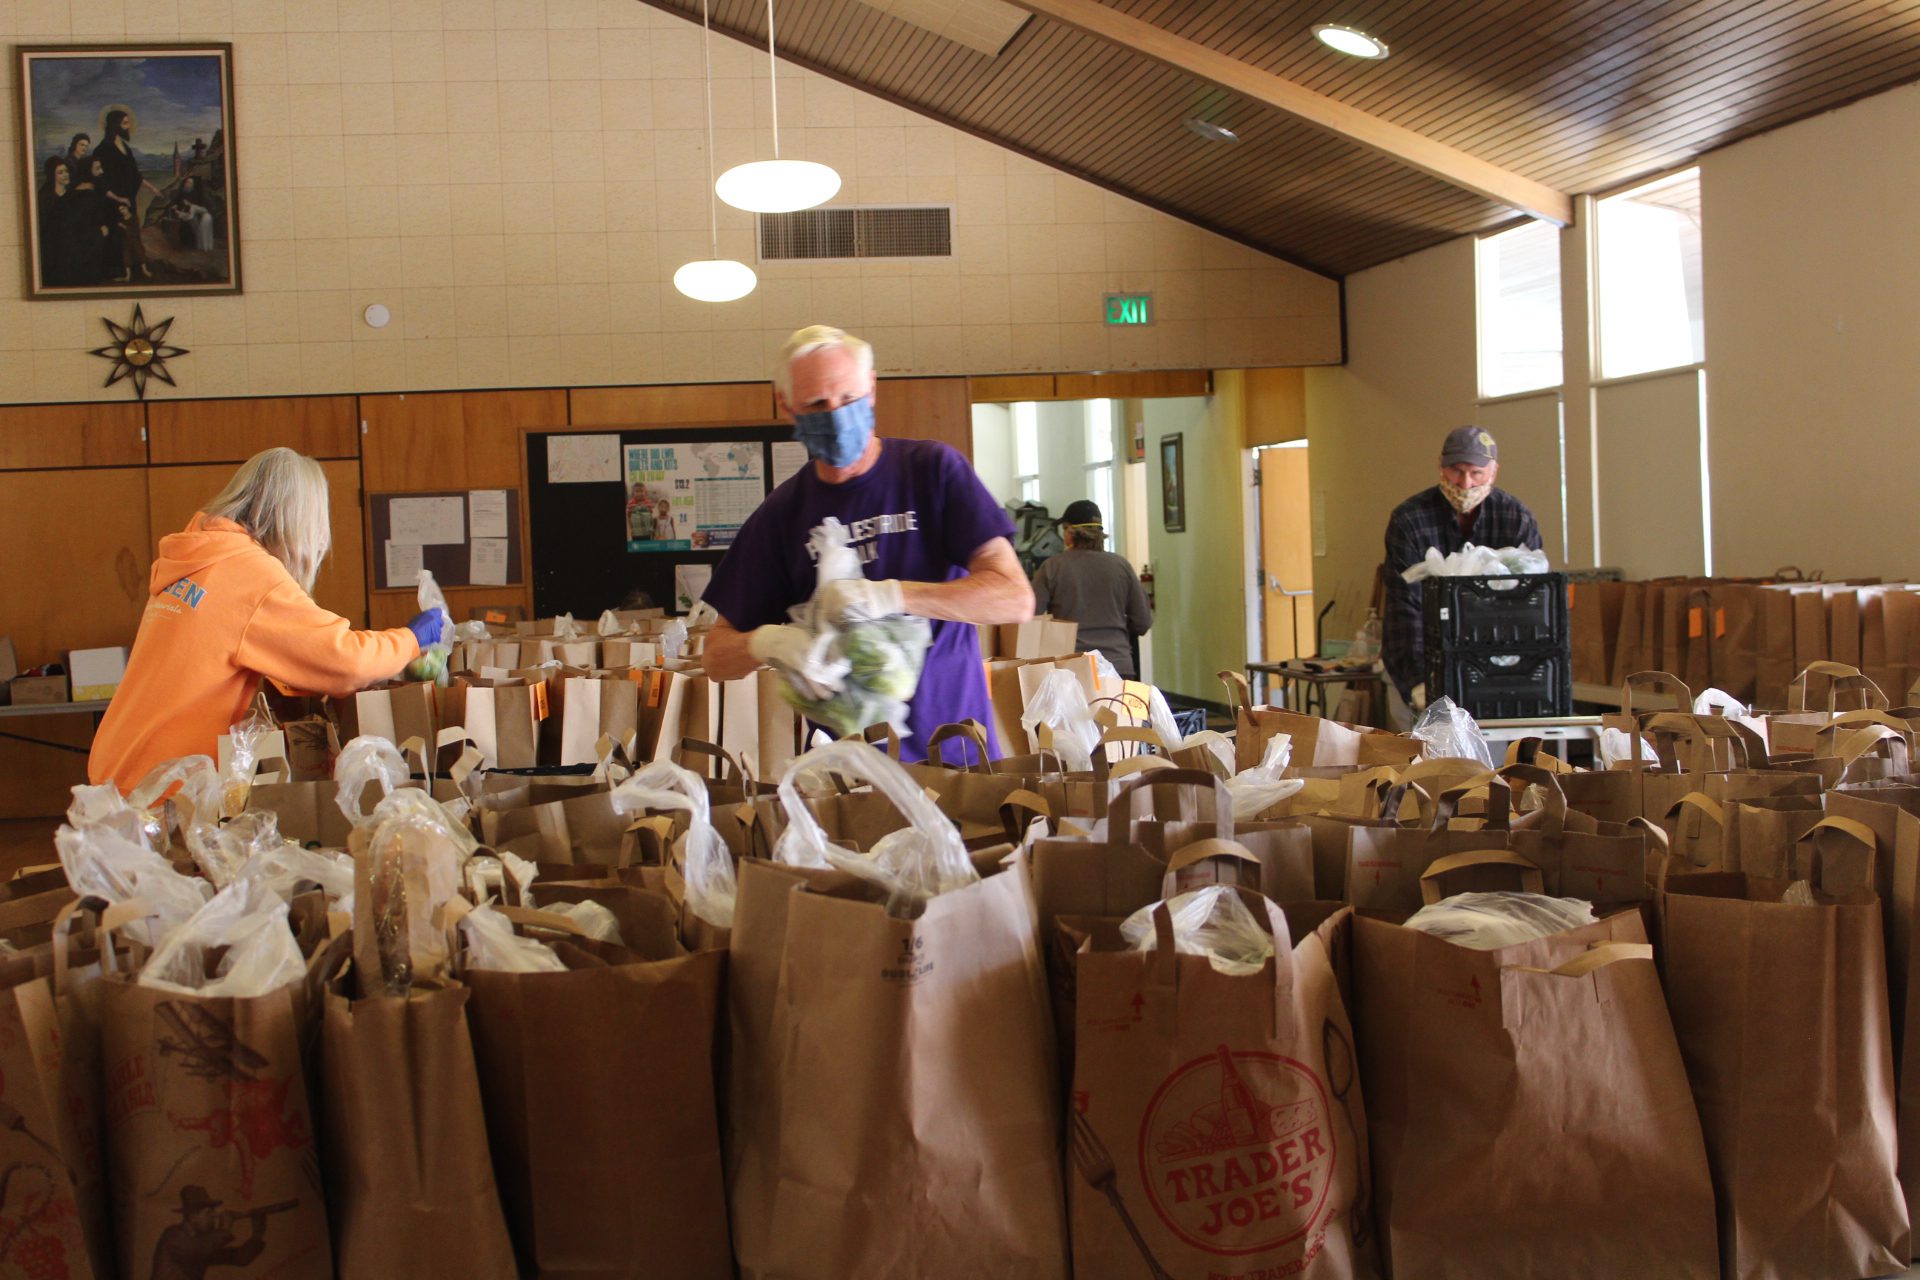 Bethania Lutheran Church serving food, supplies to local families in need